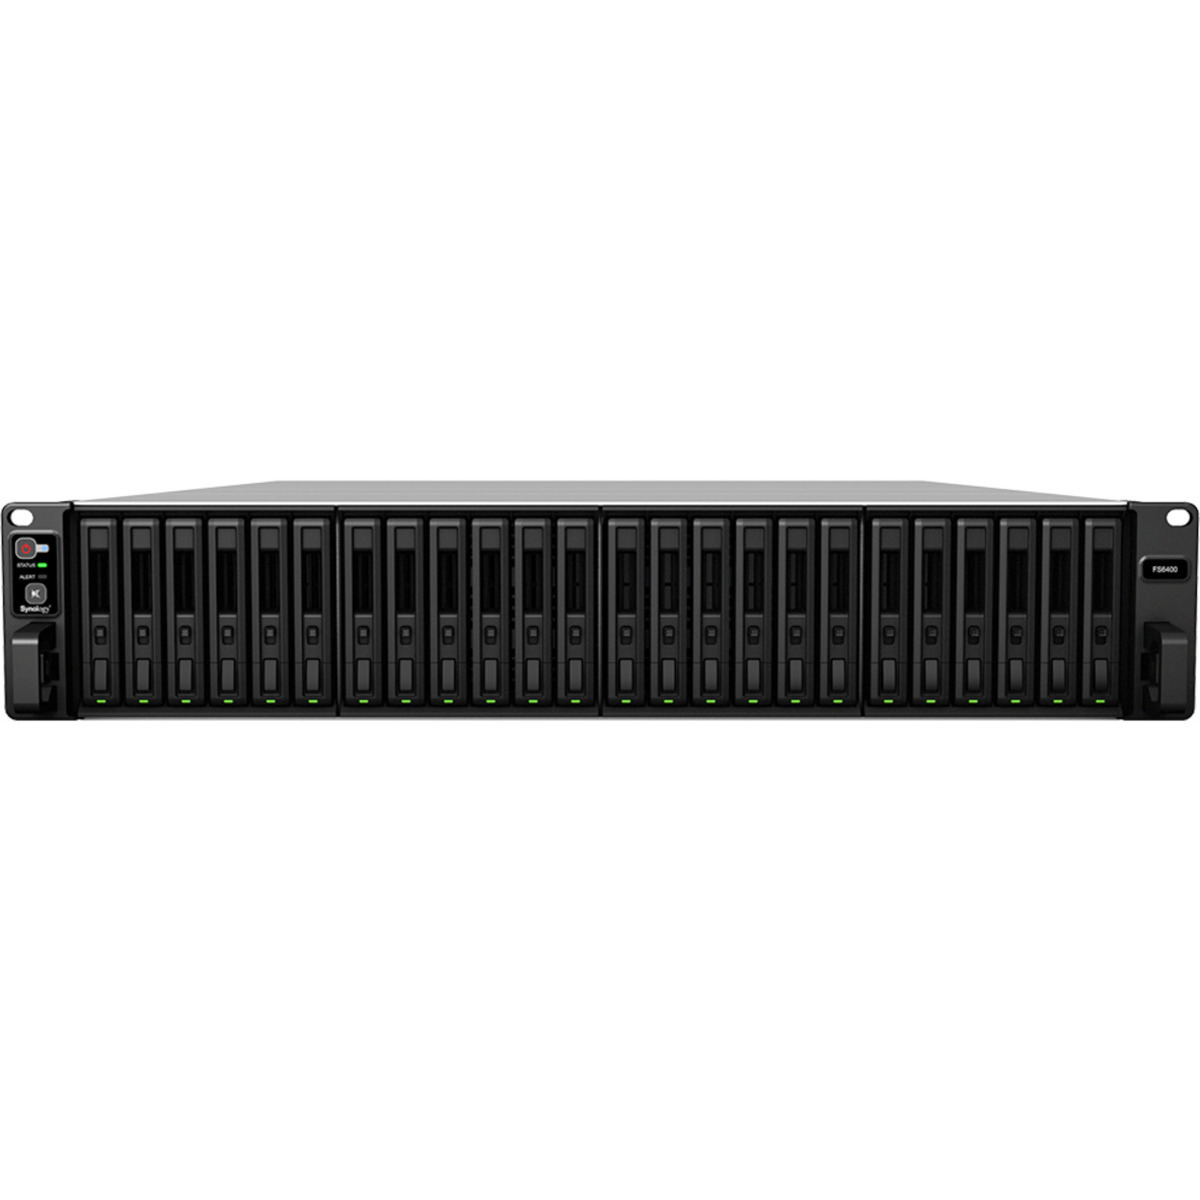 buy $25203 Synology FlashStation FS6400 192tb RackMount NAS - Network Attached Storage Device 24x8000gb Samsung 870 QVO MZ-77Q8T0 2.5 560/530MB/s SATA 6Gb/s SSD CONSUMER Class Drives Installed - Burn-In Tested - nas headquarters buy network attached storage server device das new raid-5 free shipping usa FlashStation FS6400